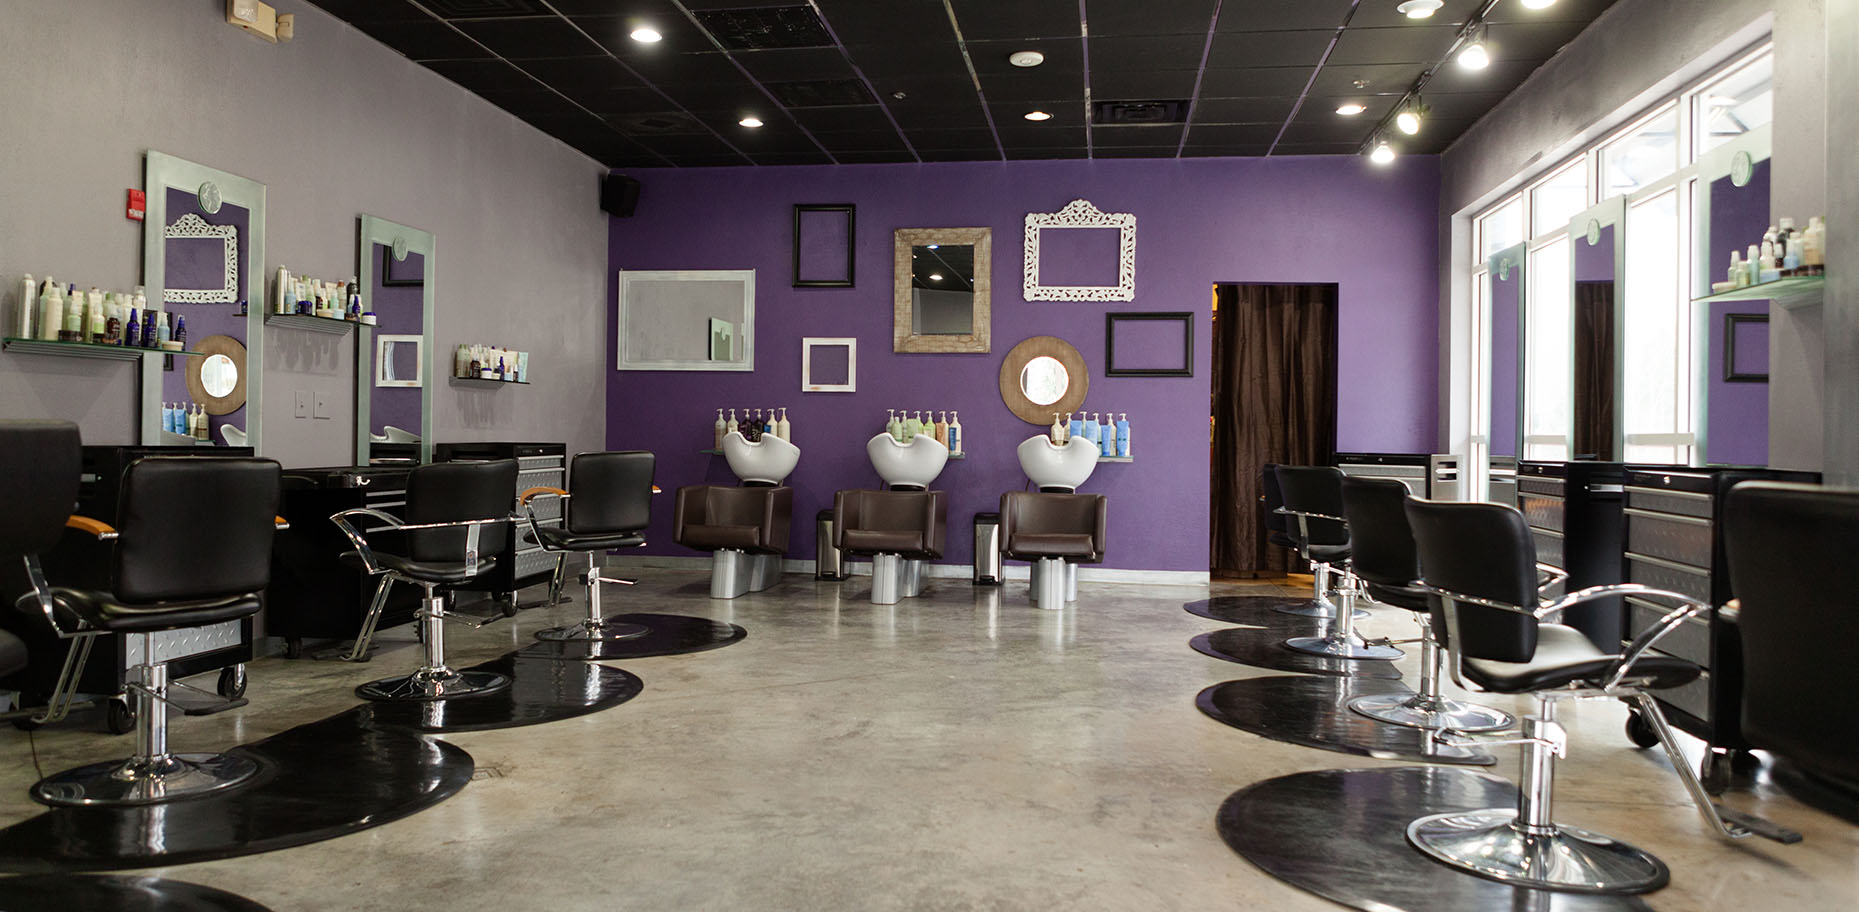 7 Tips for Finding a New Hair Salon - Salon Price Lady